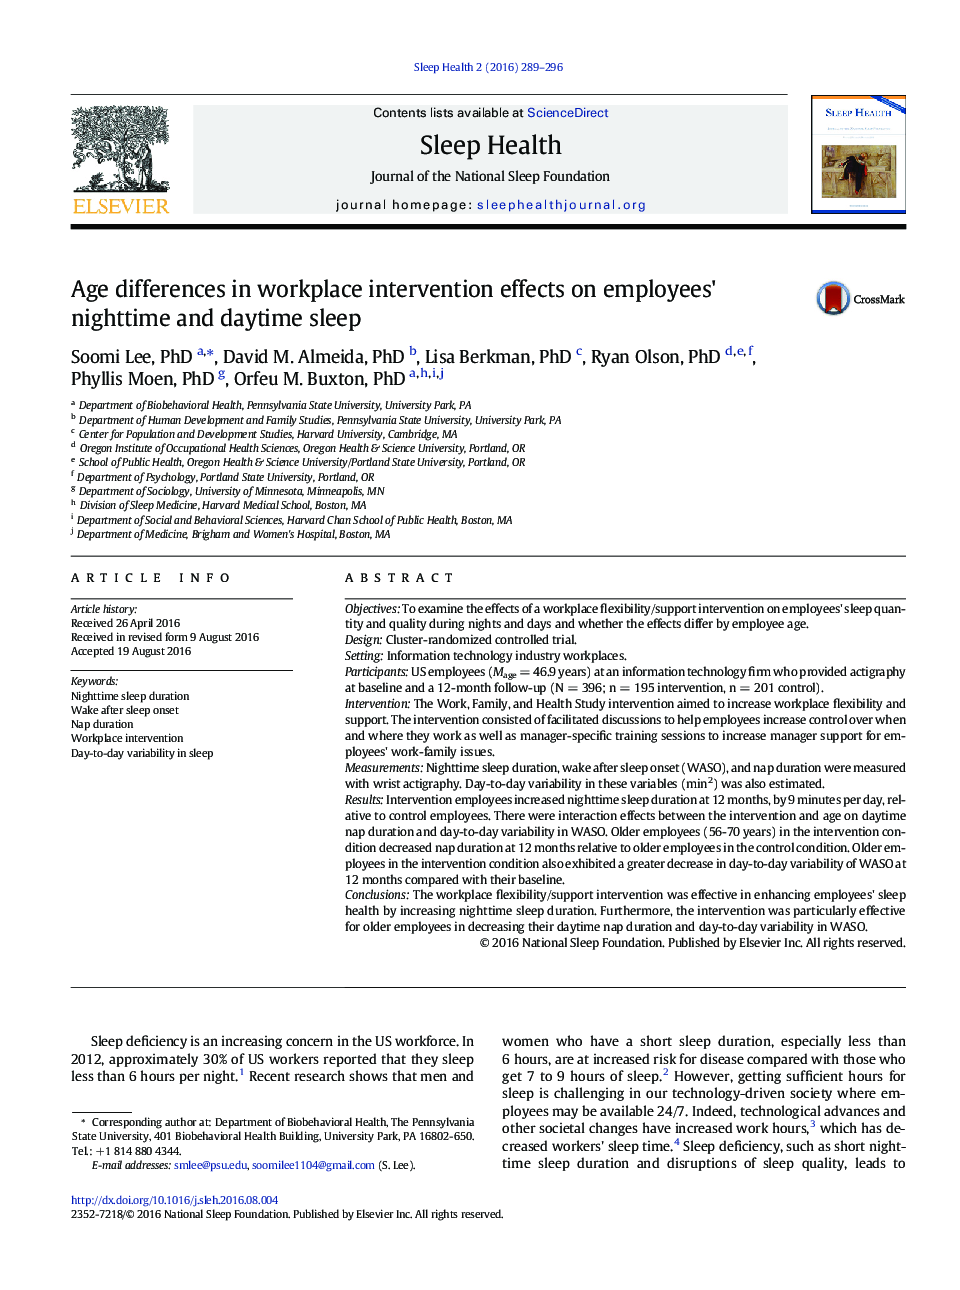 Age differences in workplace intervention effects on employees' nighttime and daytime sleep